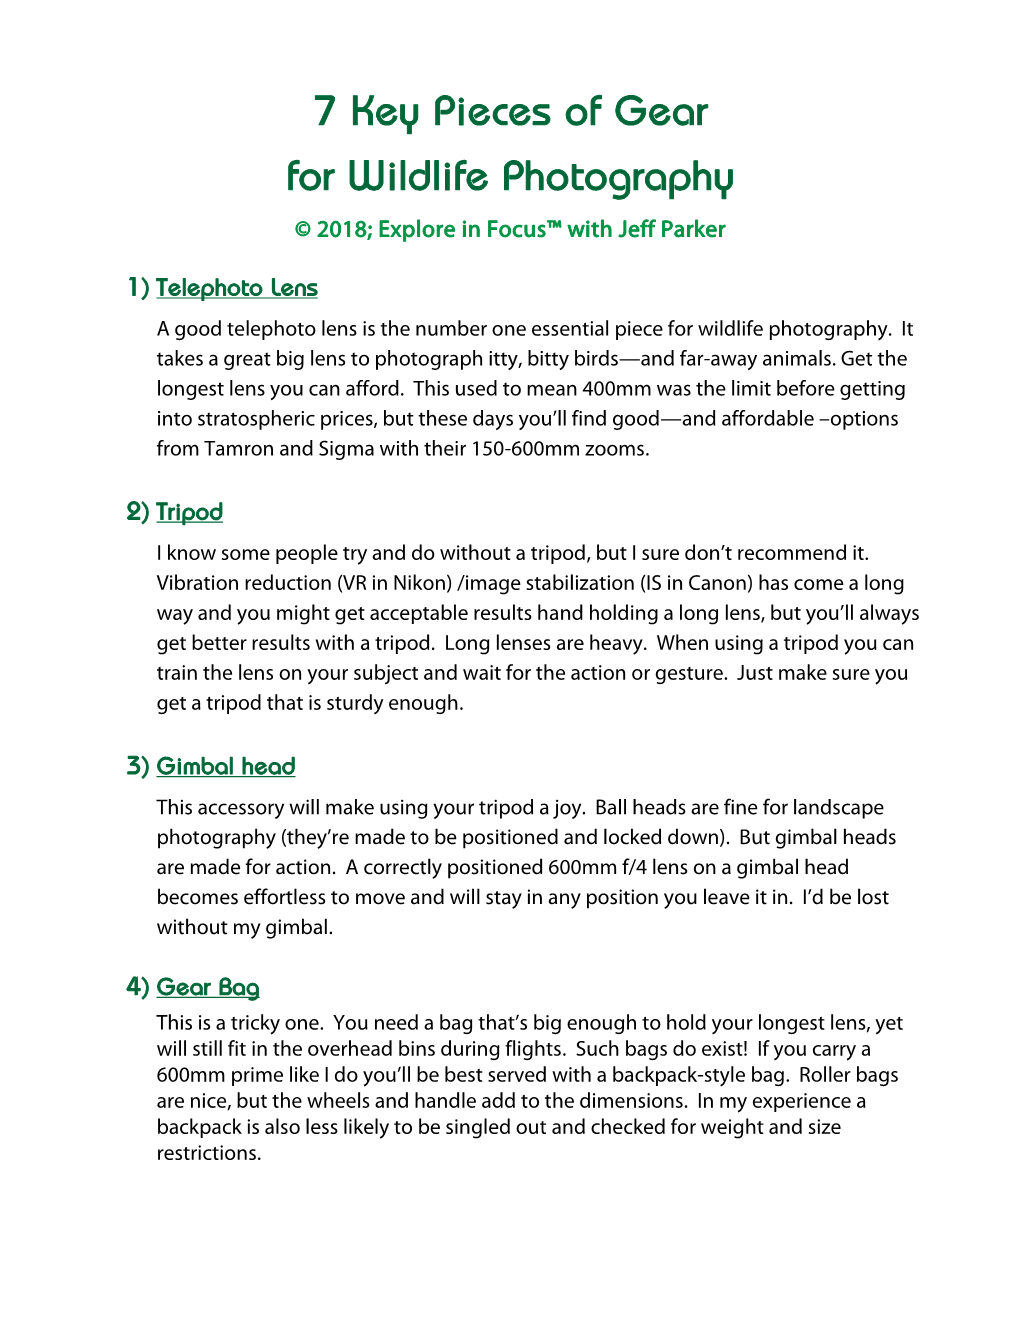 7 Key Pieces of Gear for Wildlife Photography © 2018; Explore in Focus™ with Jeff Parker